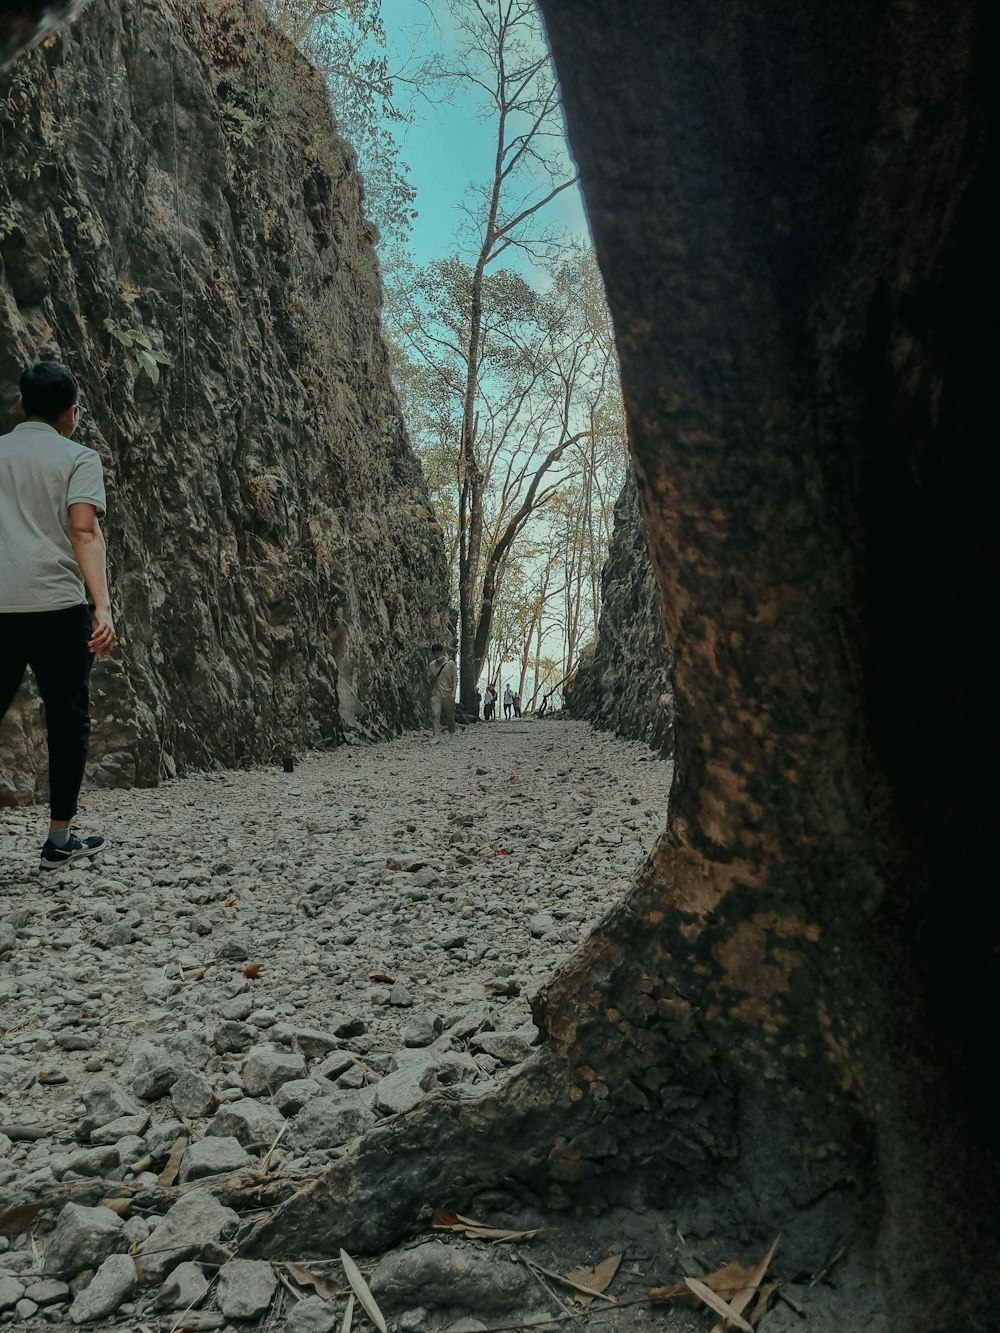 a man walking down a rocky road next to a tree